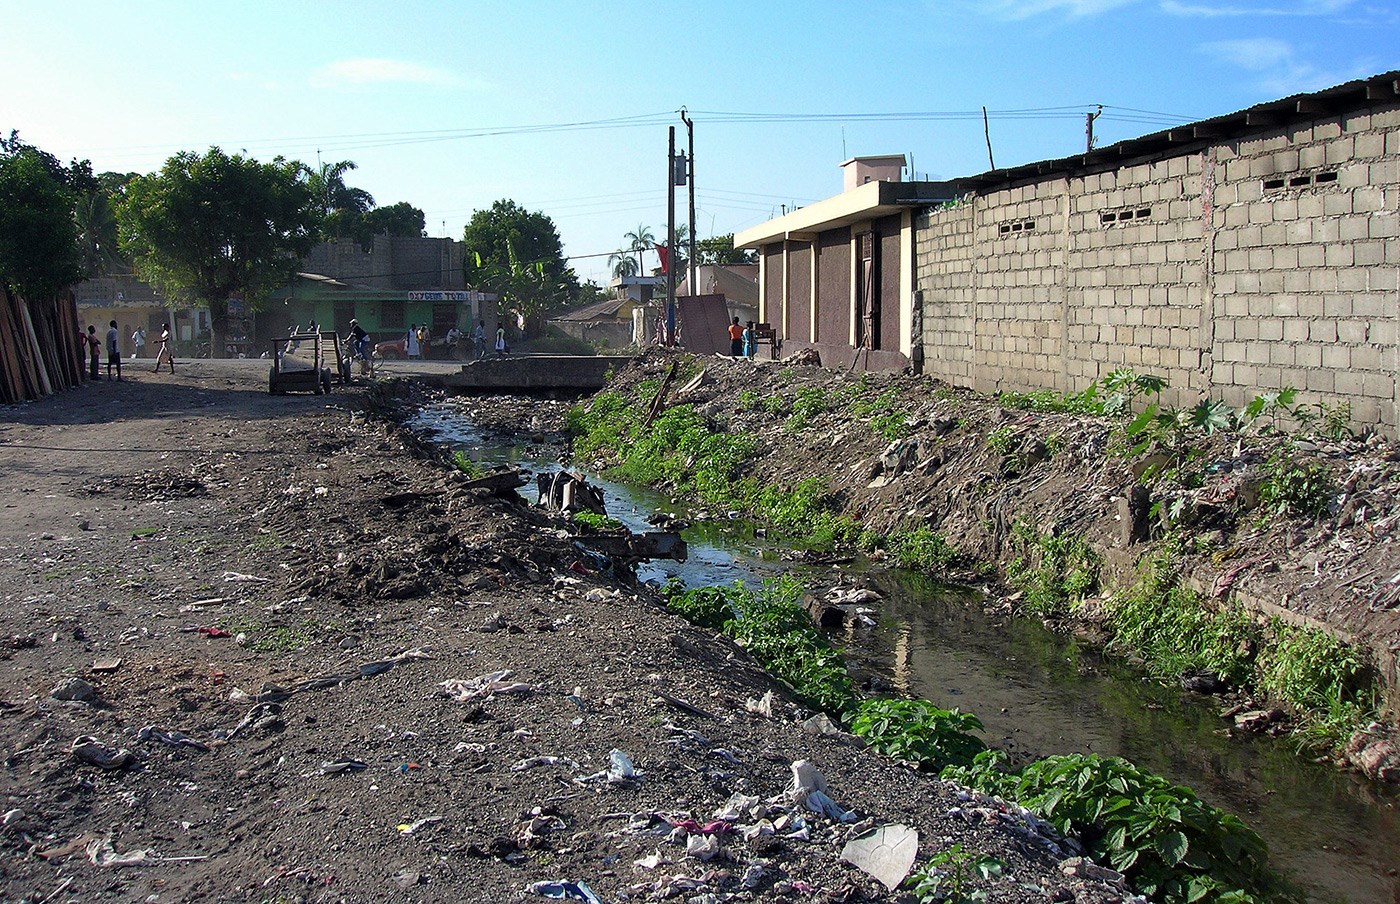  Poor sanitation in the area of Dlo Gervier, Cap-Haitien, Haiti : solid waste on the ground, drainage channel blocked, plastic bags containing excreta, road damaged by runoff water.